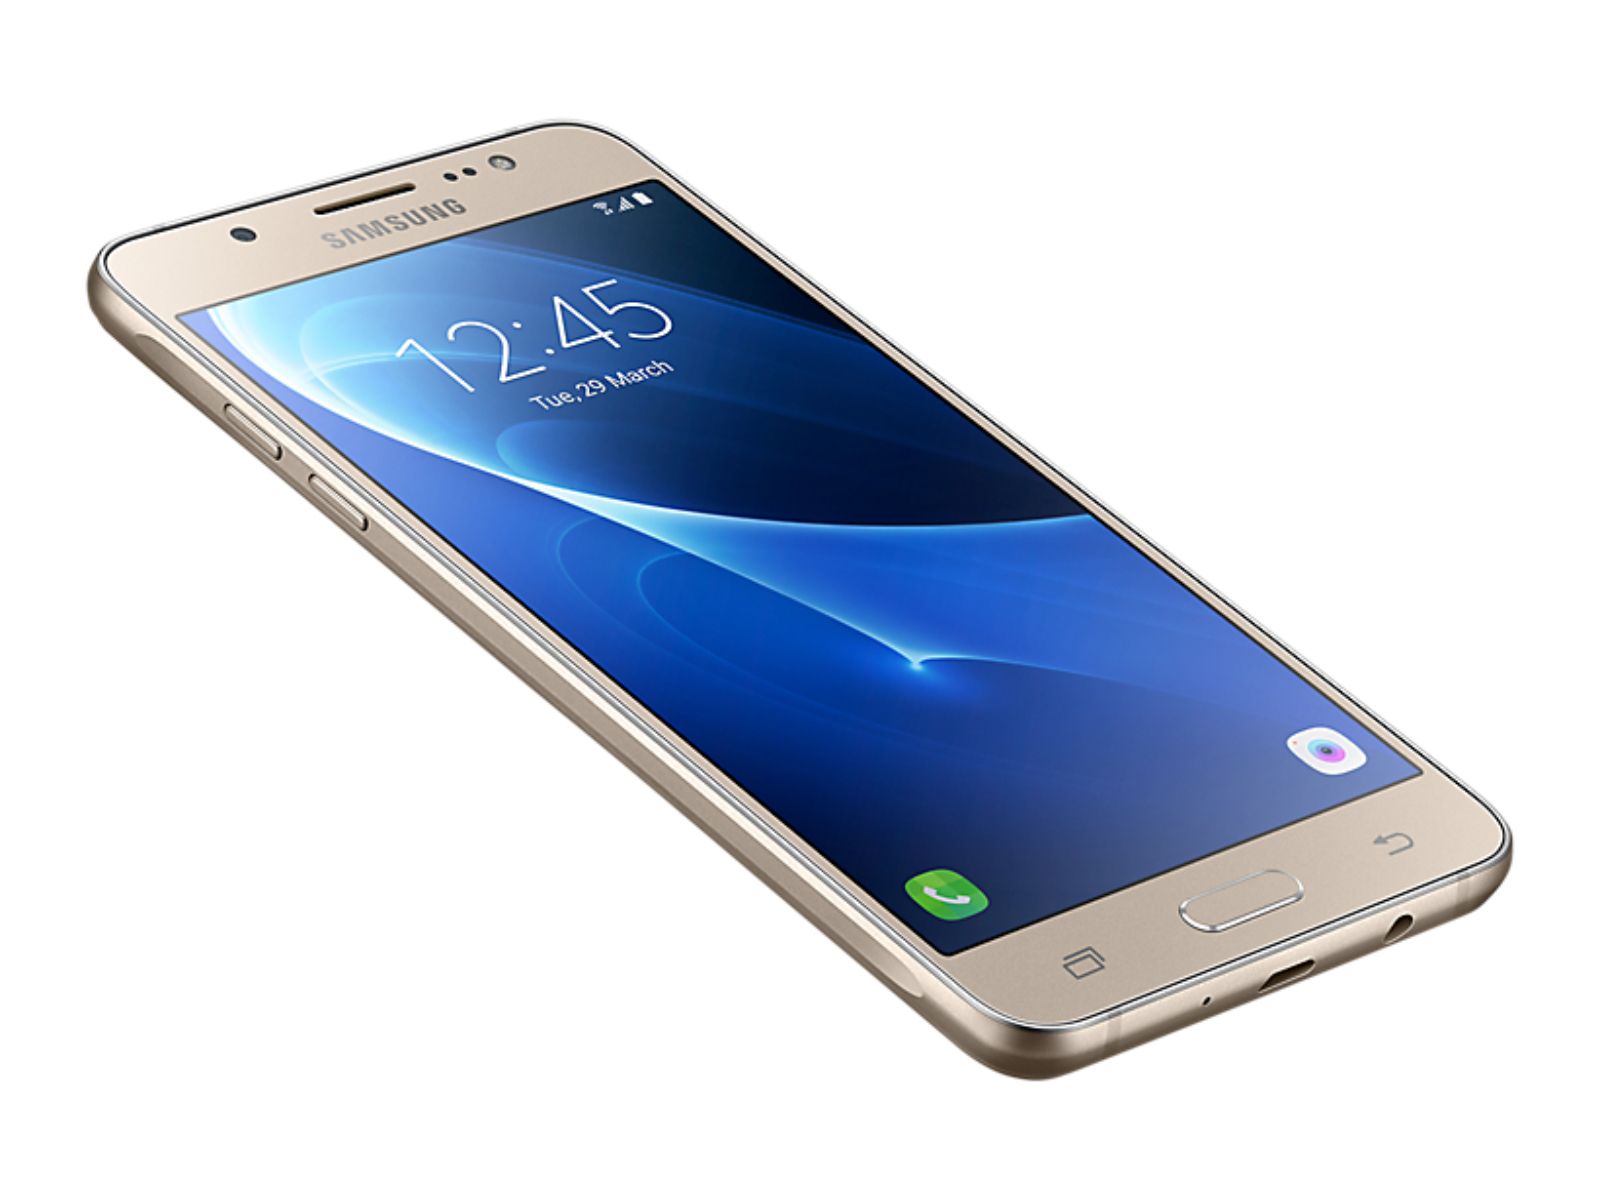 samsung s new galaxy j series phones coming to the uk soon image 1